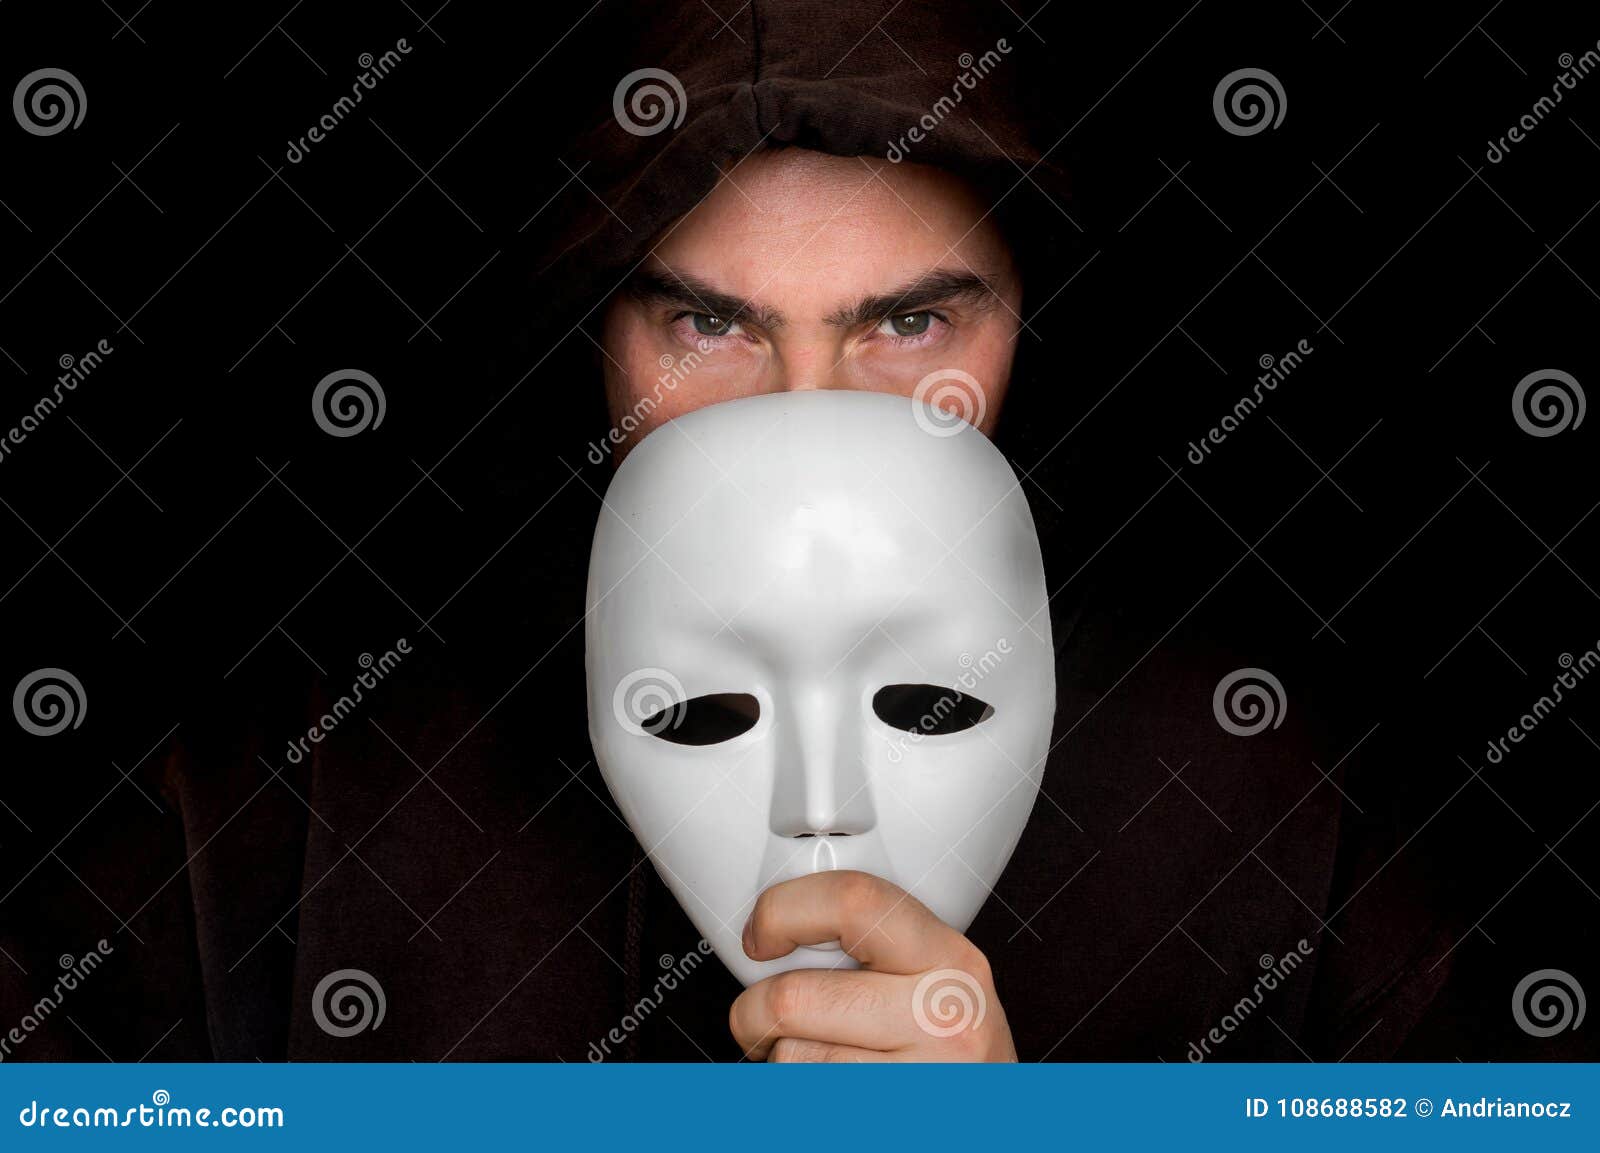 mysterious man in black hiding his face behind white mask